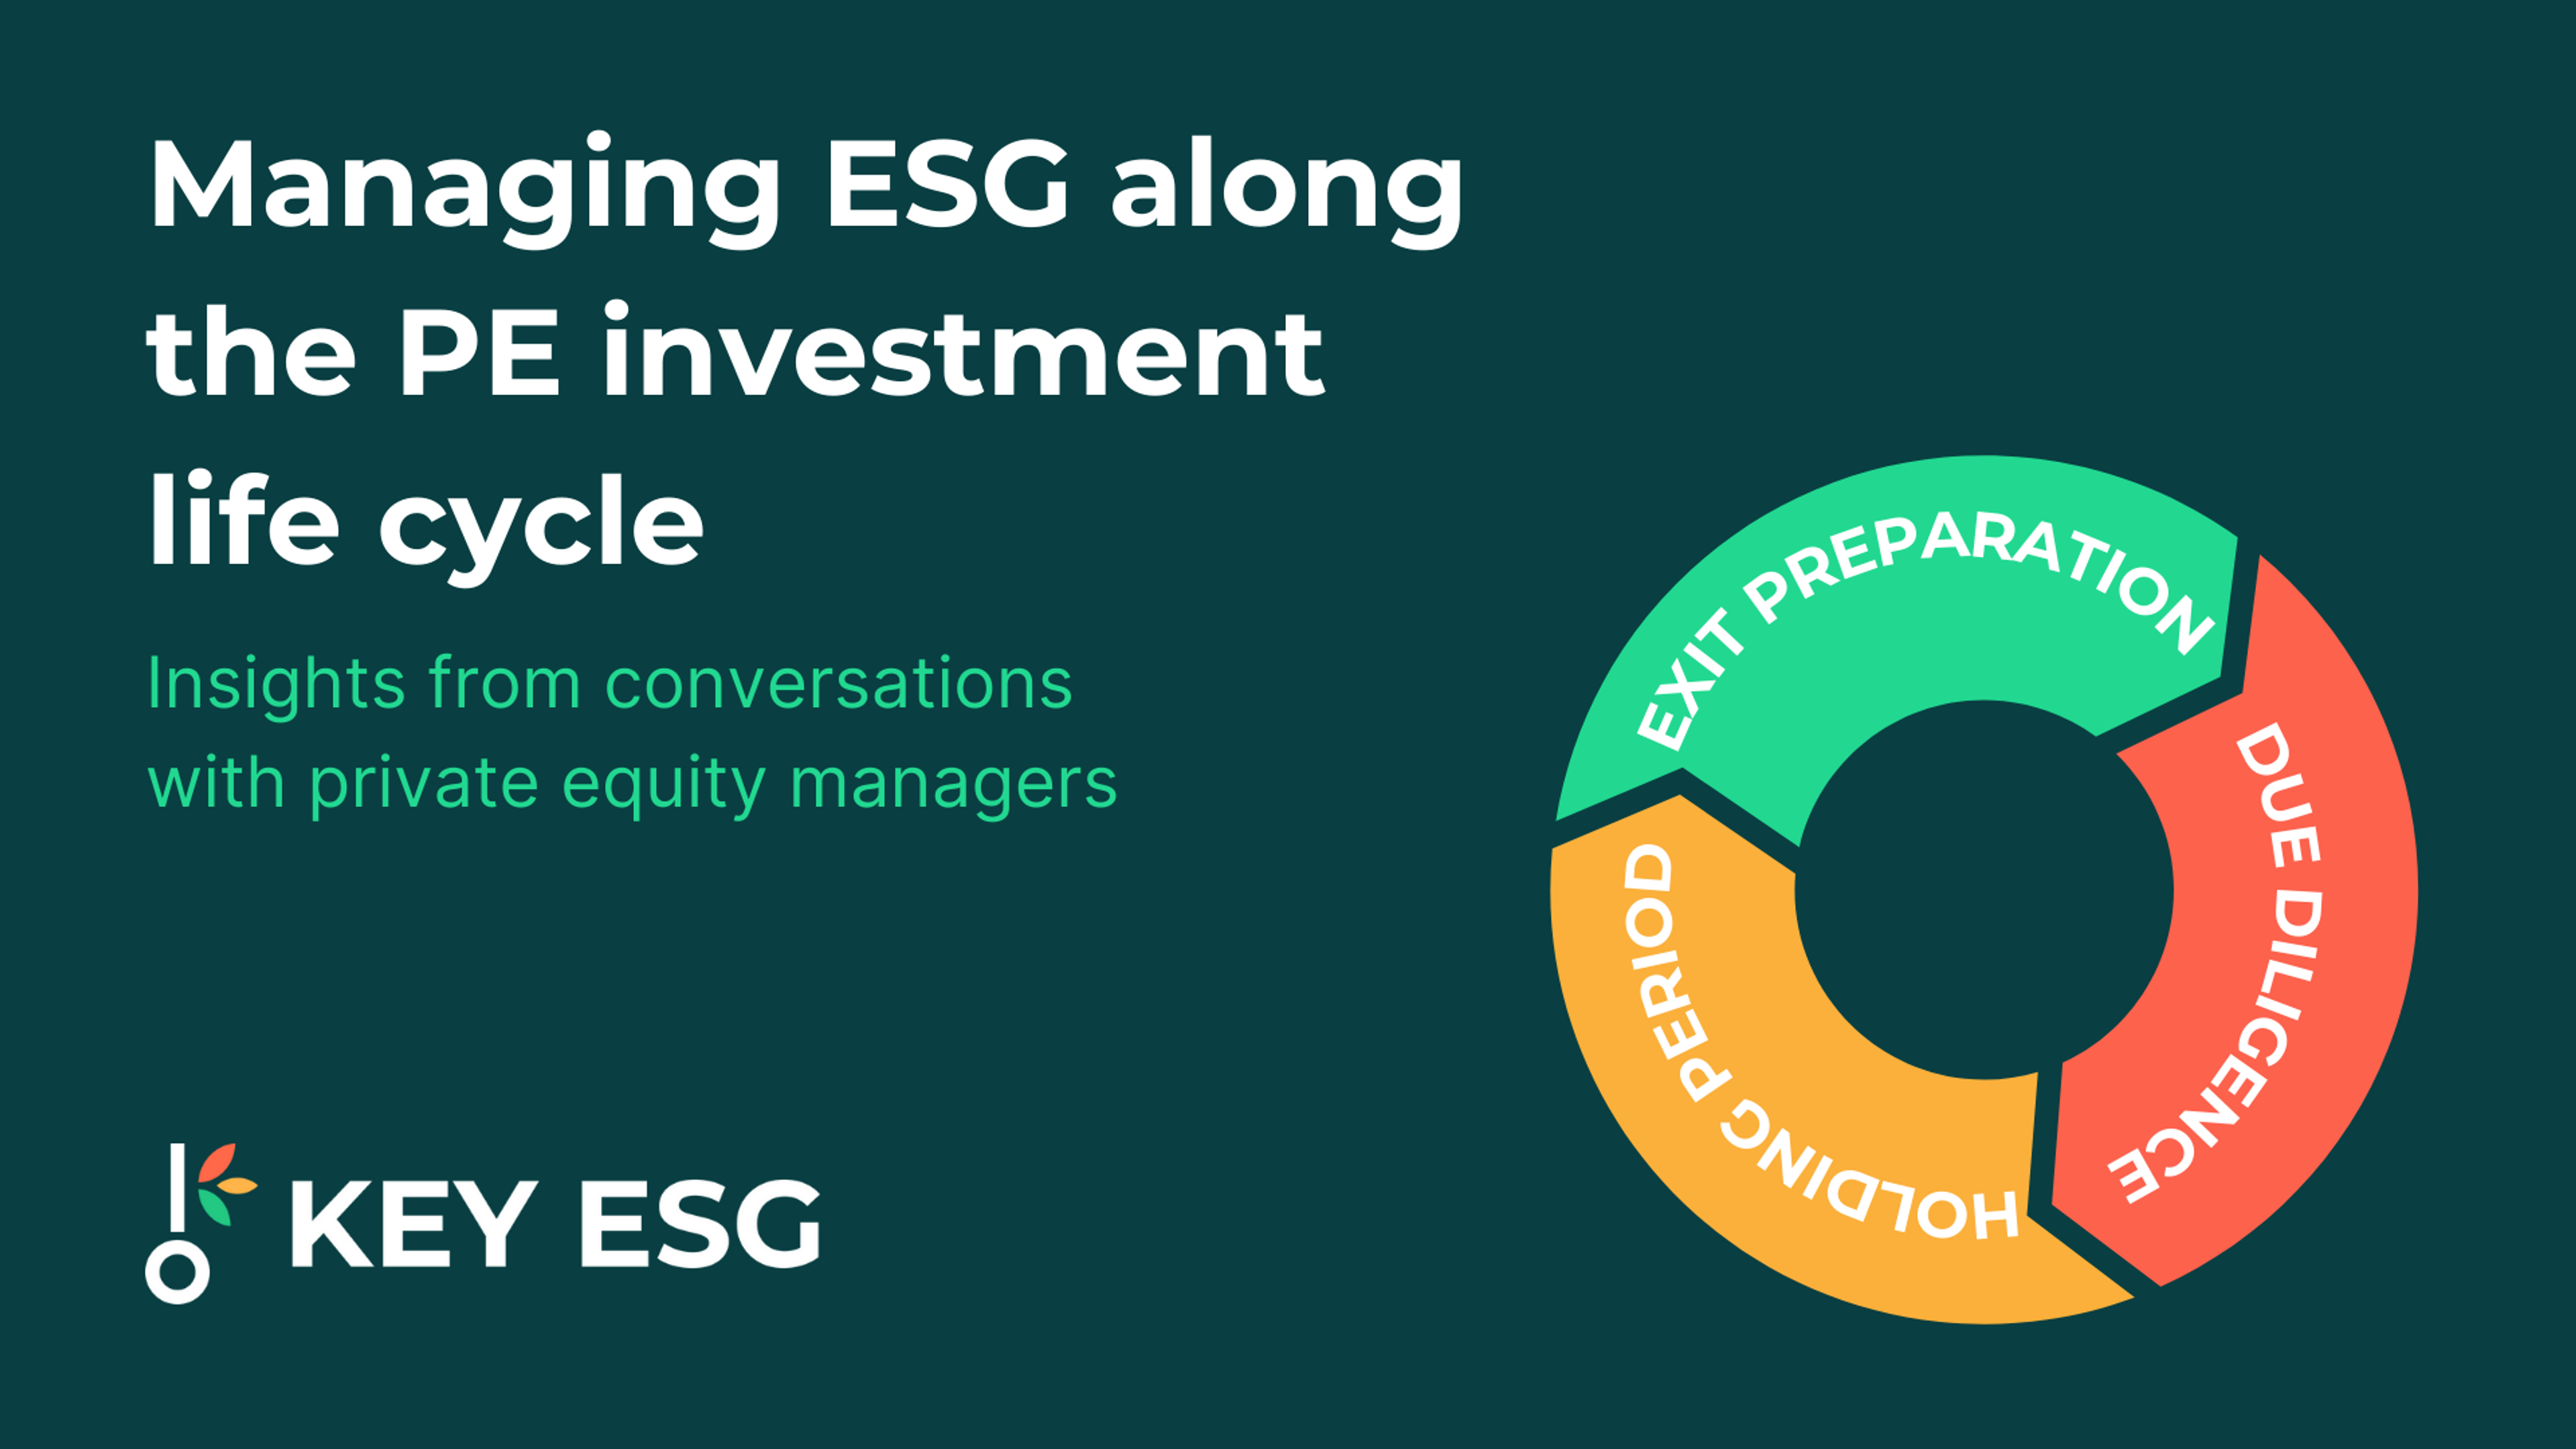 Managing ESG along the PE investment life cycle